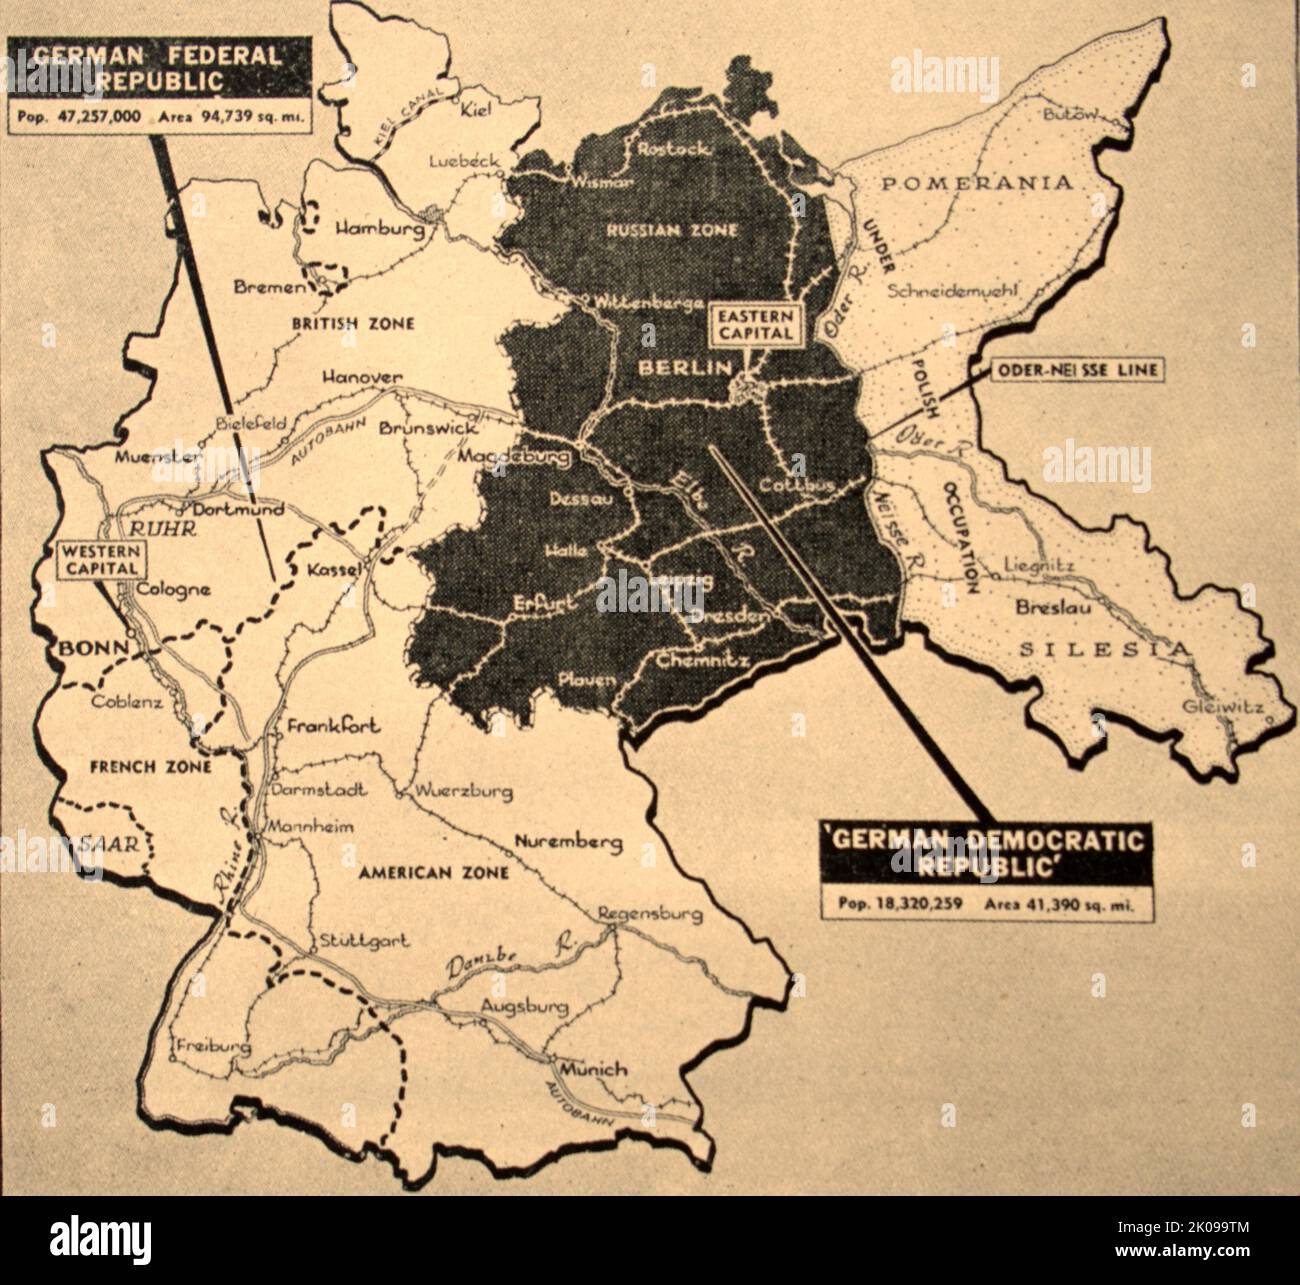 Map to show the divided state of Germany after World War II. Stock Photo